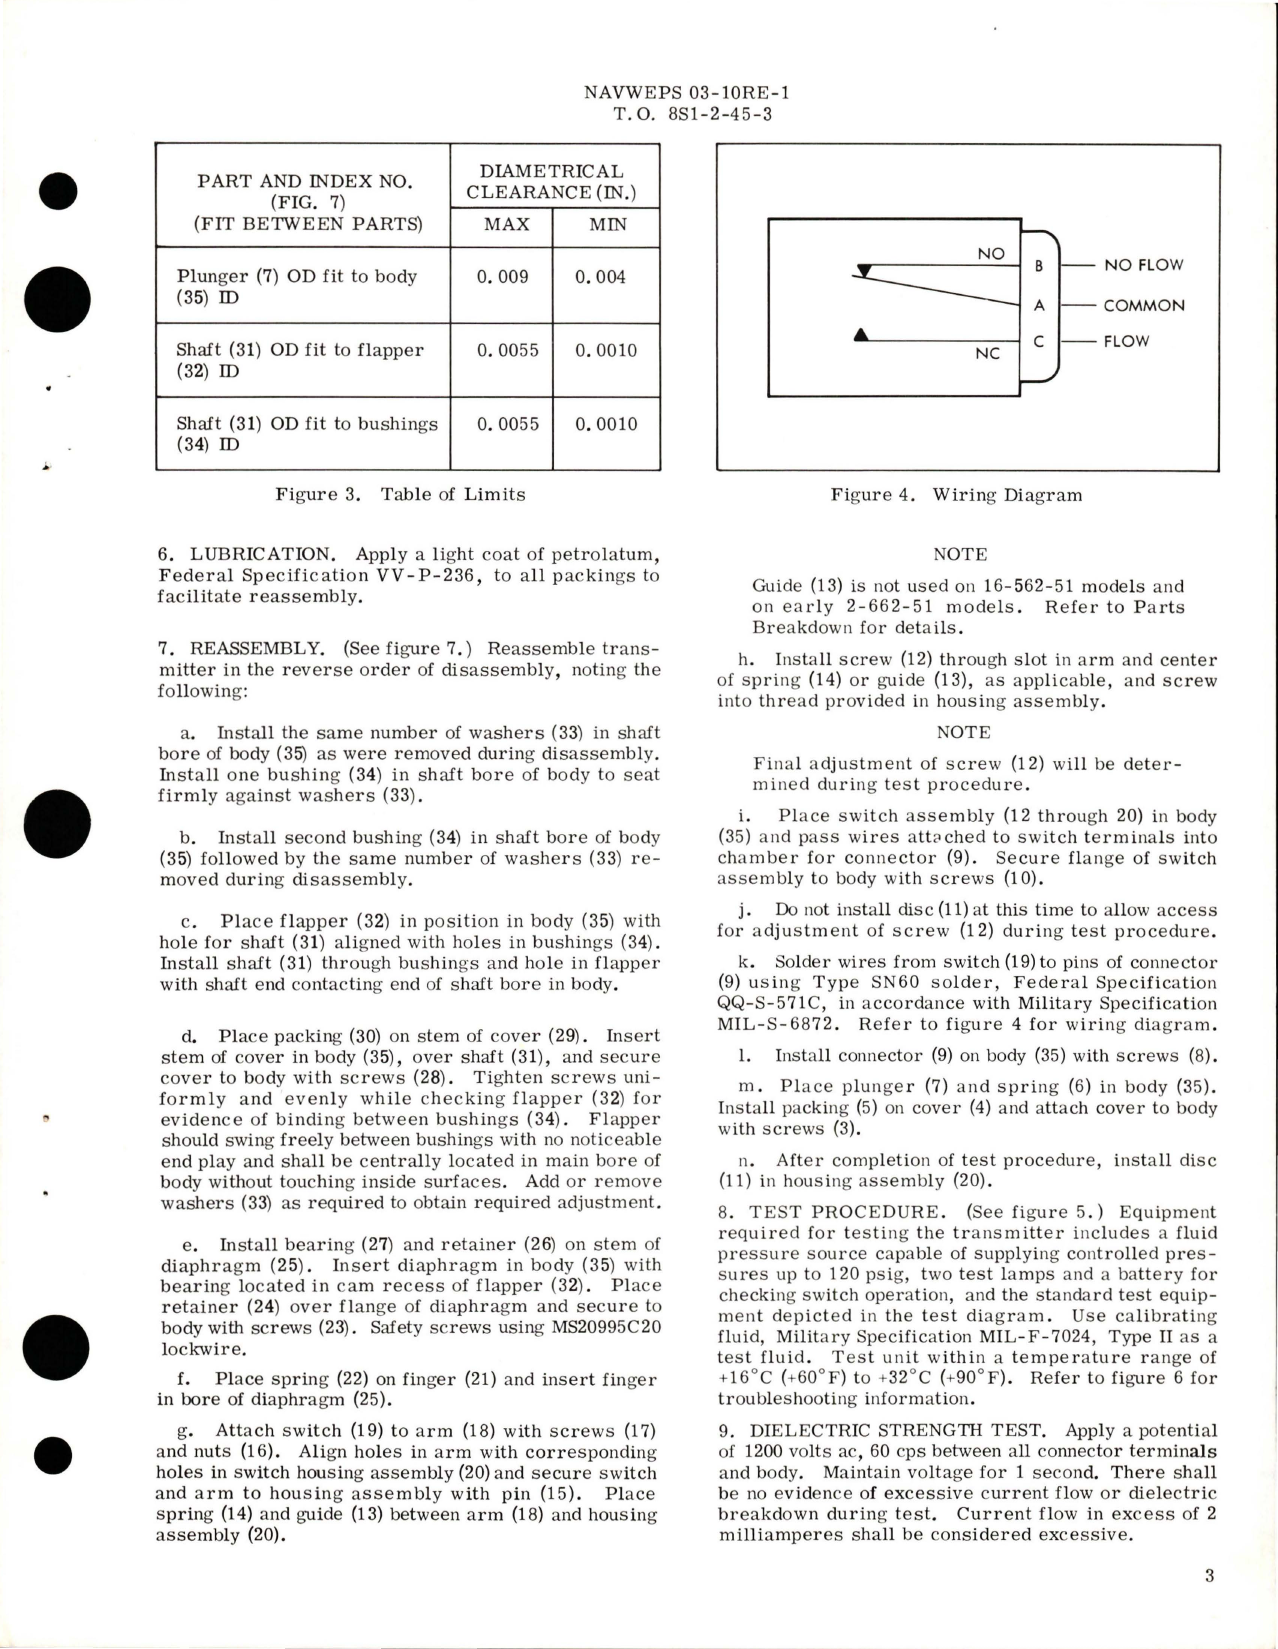 Sample page 5 from AirCorps Library document: Overhaul Instructions with Parts Breakdown for Fuel Flow Transmitters - Parts 2-662-51, 16-562-51 